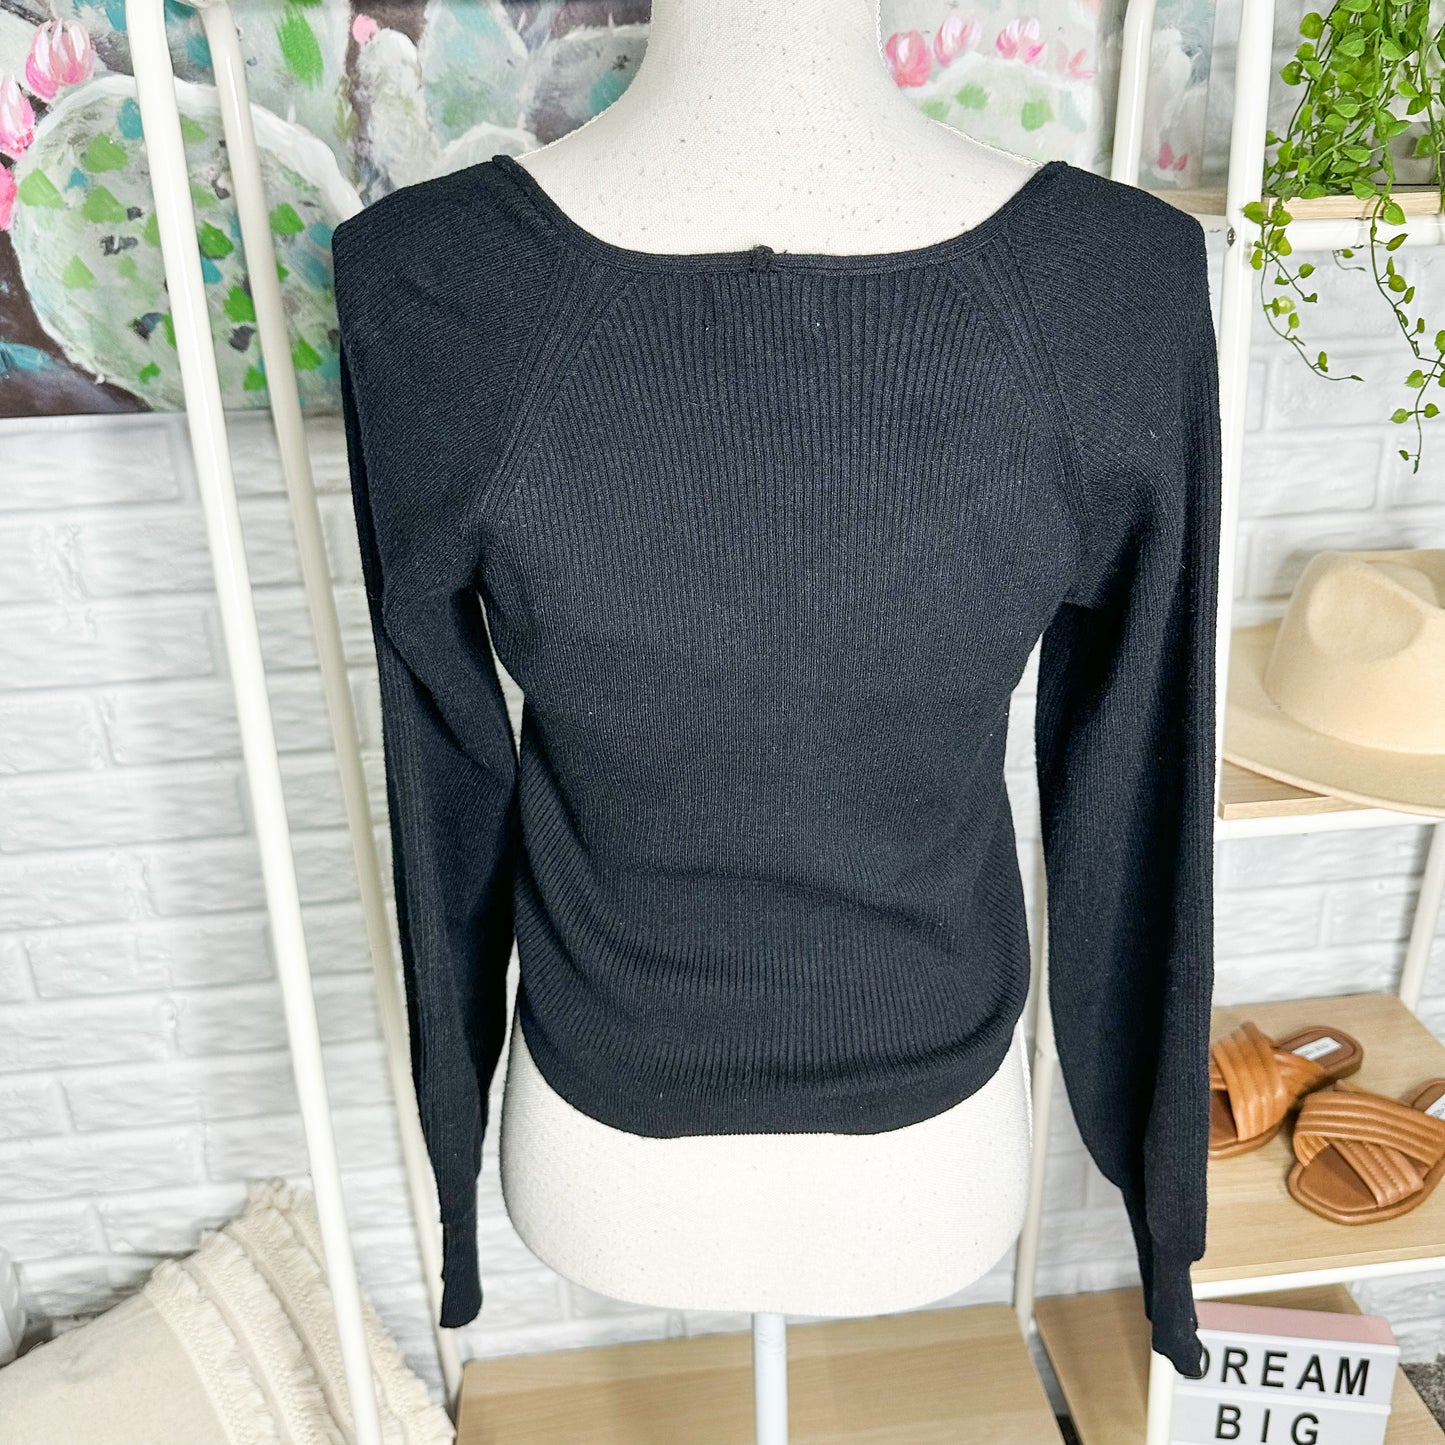 Pink Lily Black Cropped Knit Sweater Size Medium